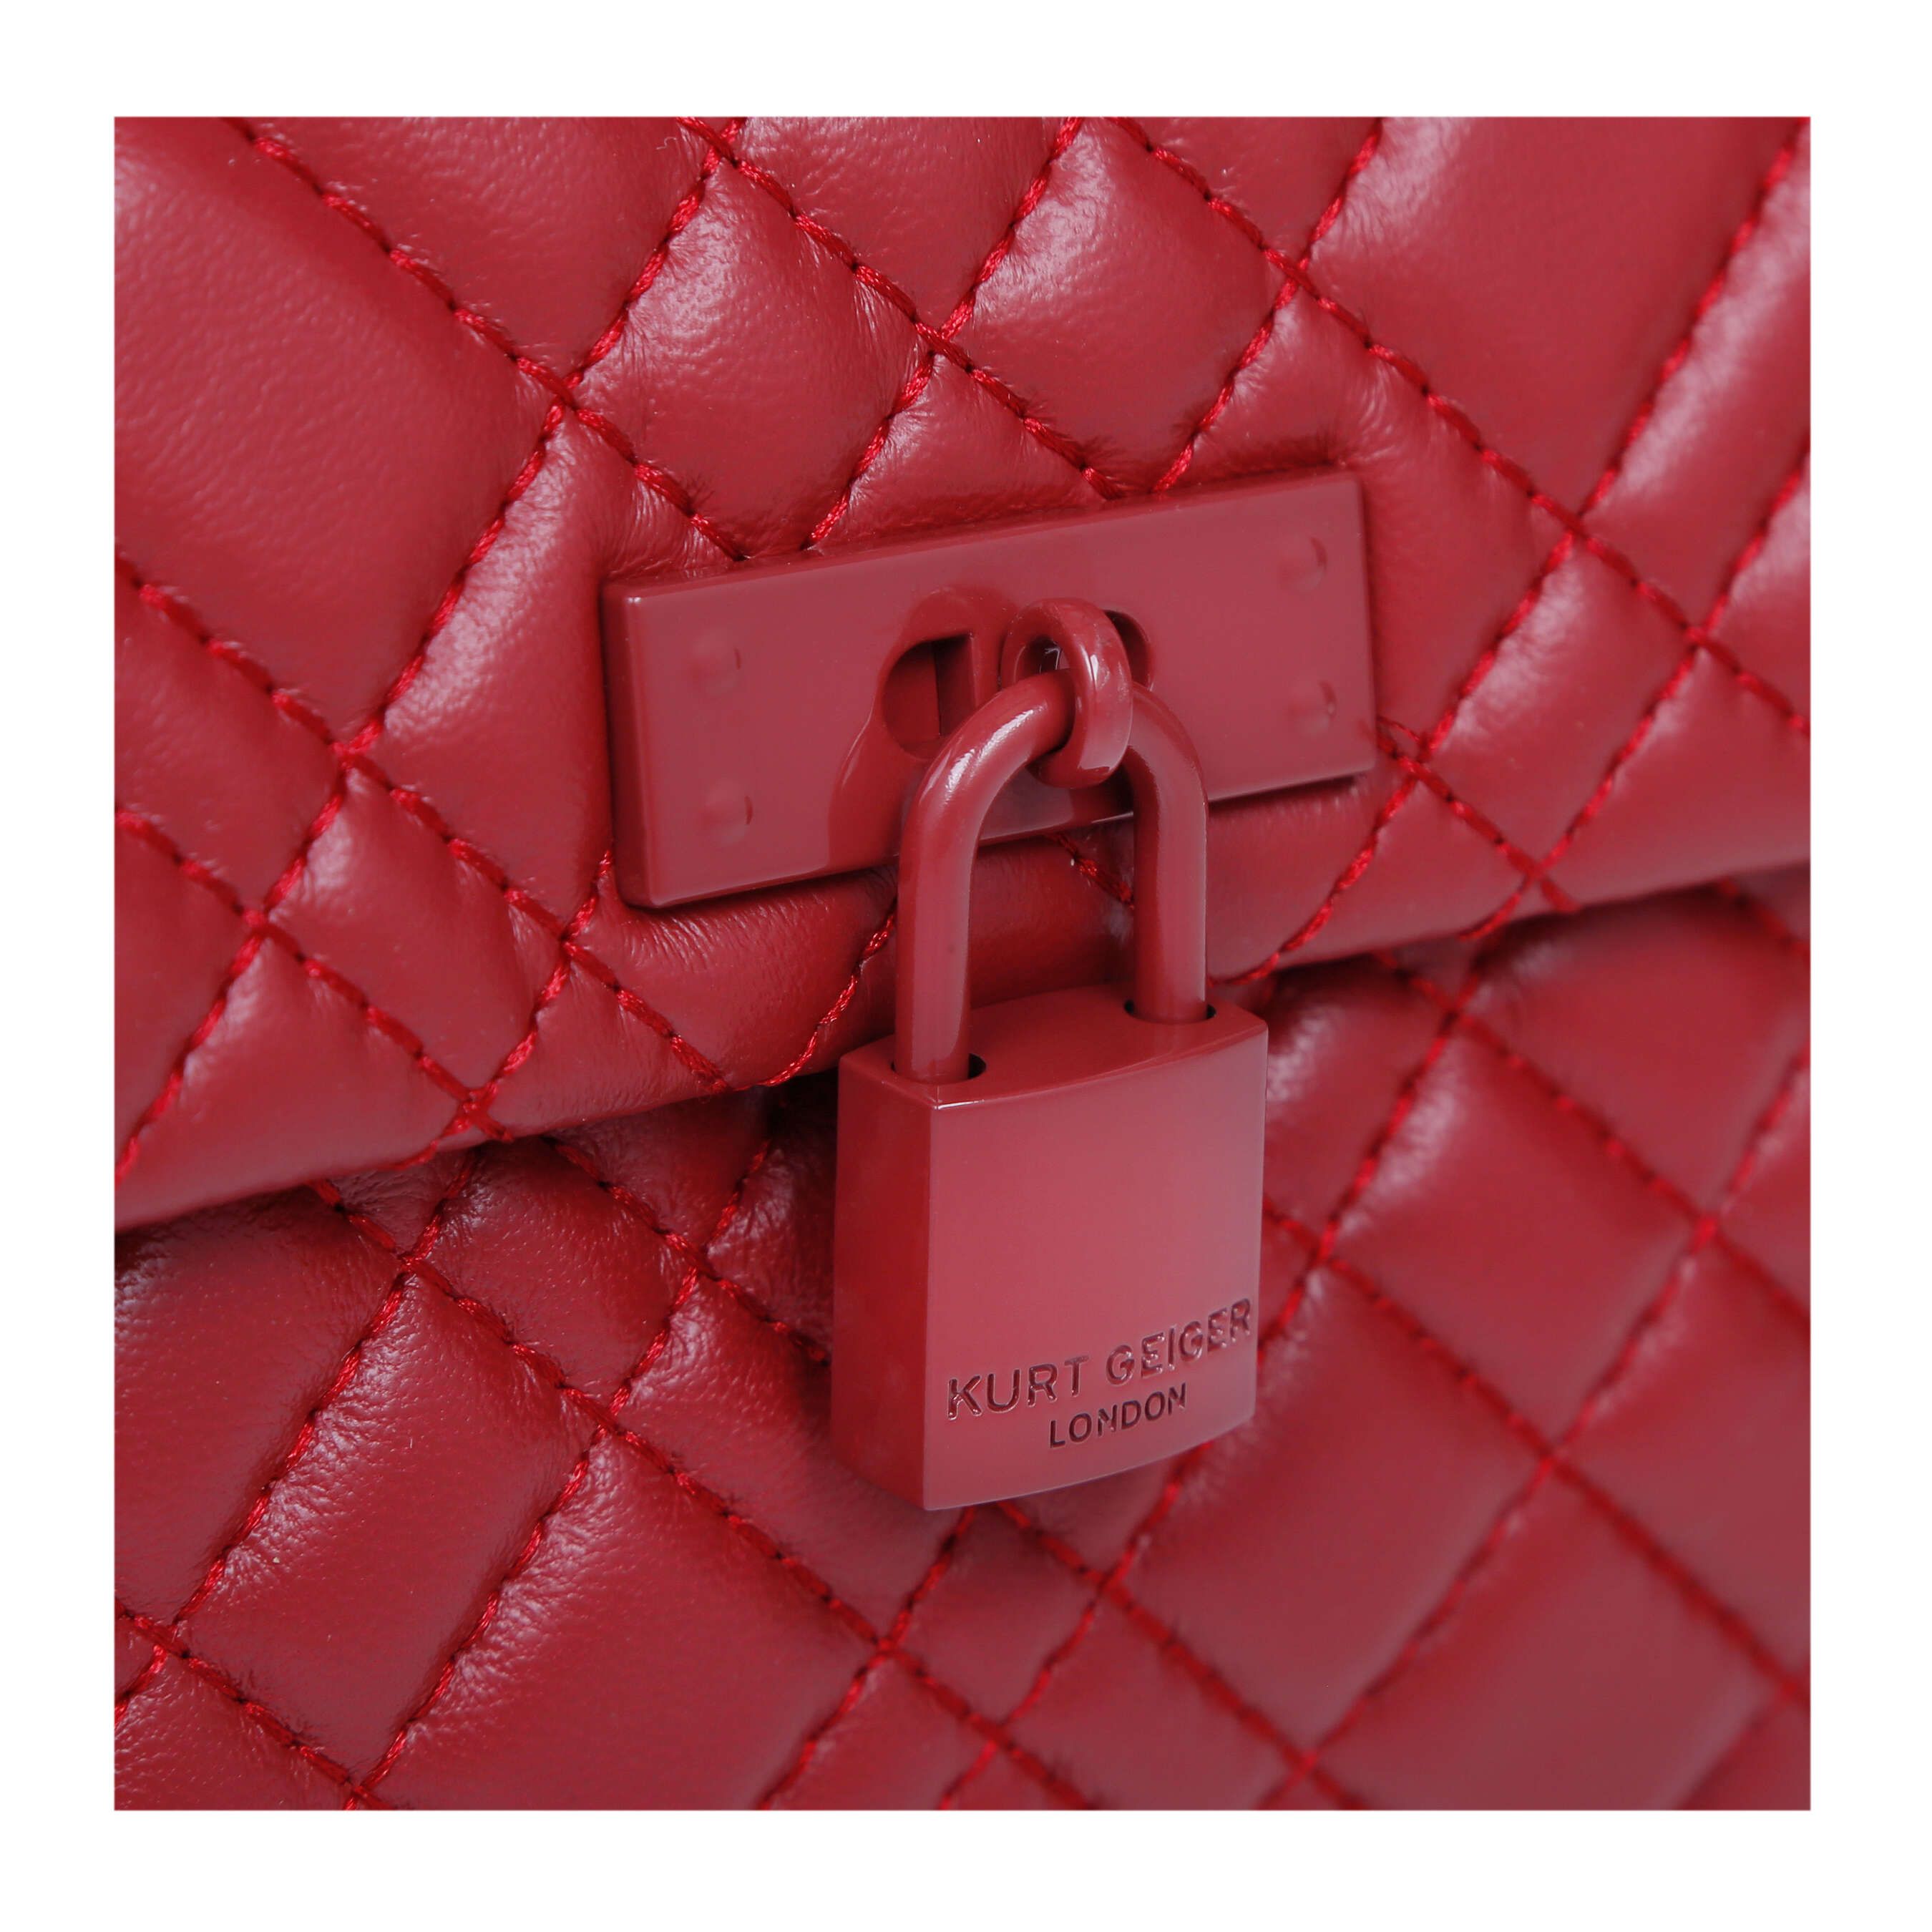 The KGL Mini Brixton Lock Bag is crafted in leather with overstitch quilting design. The wine red lock features branding on the front flap.